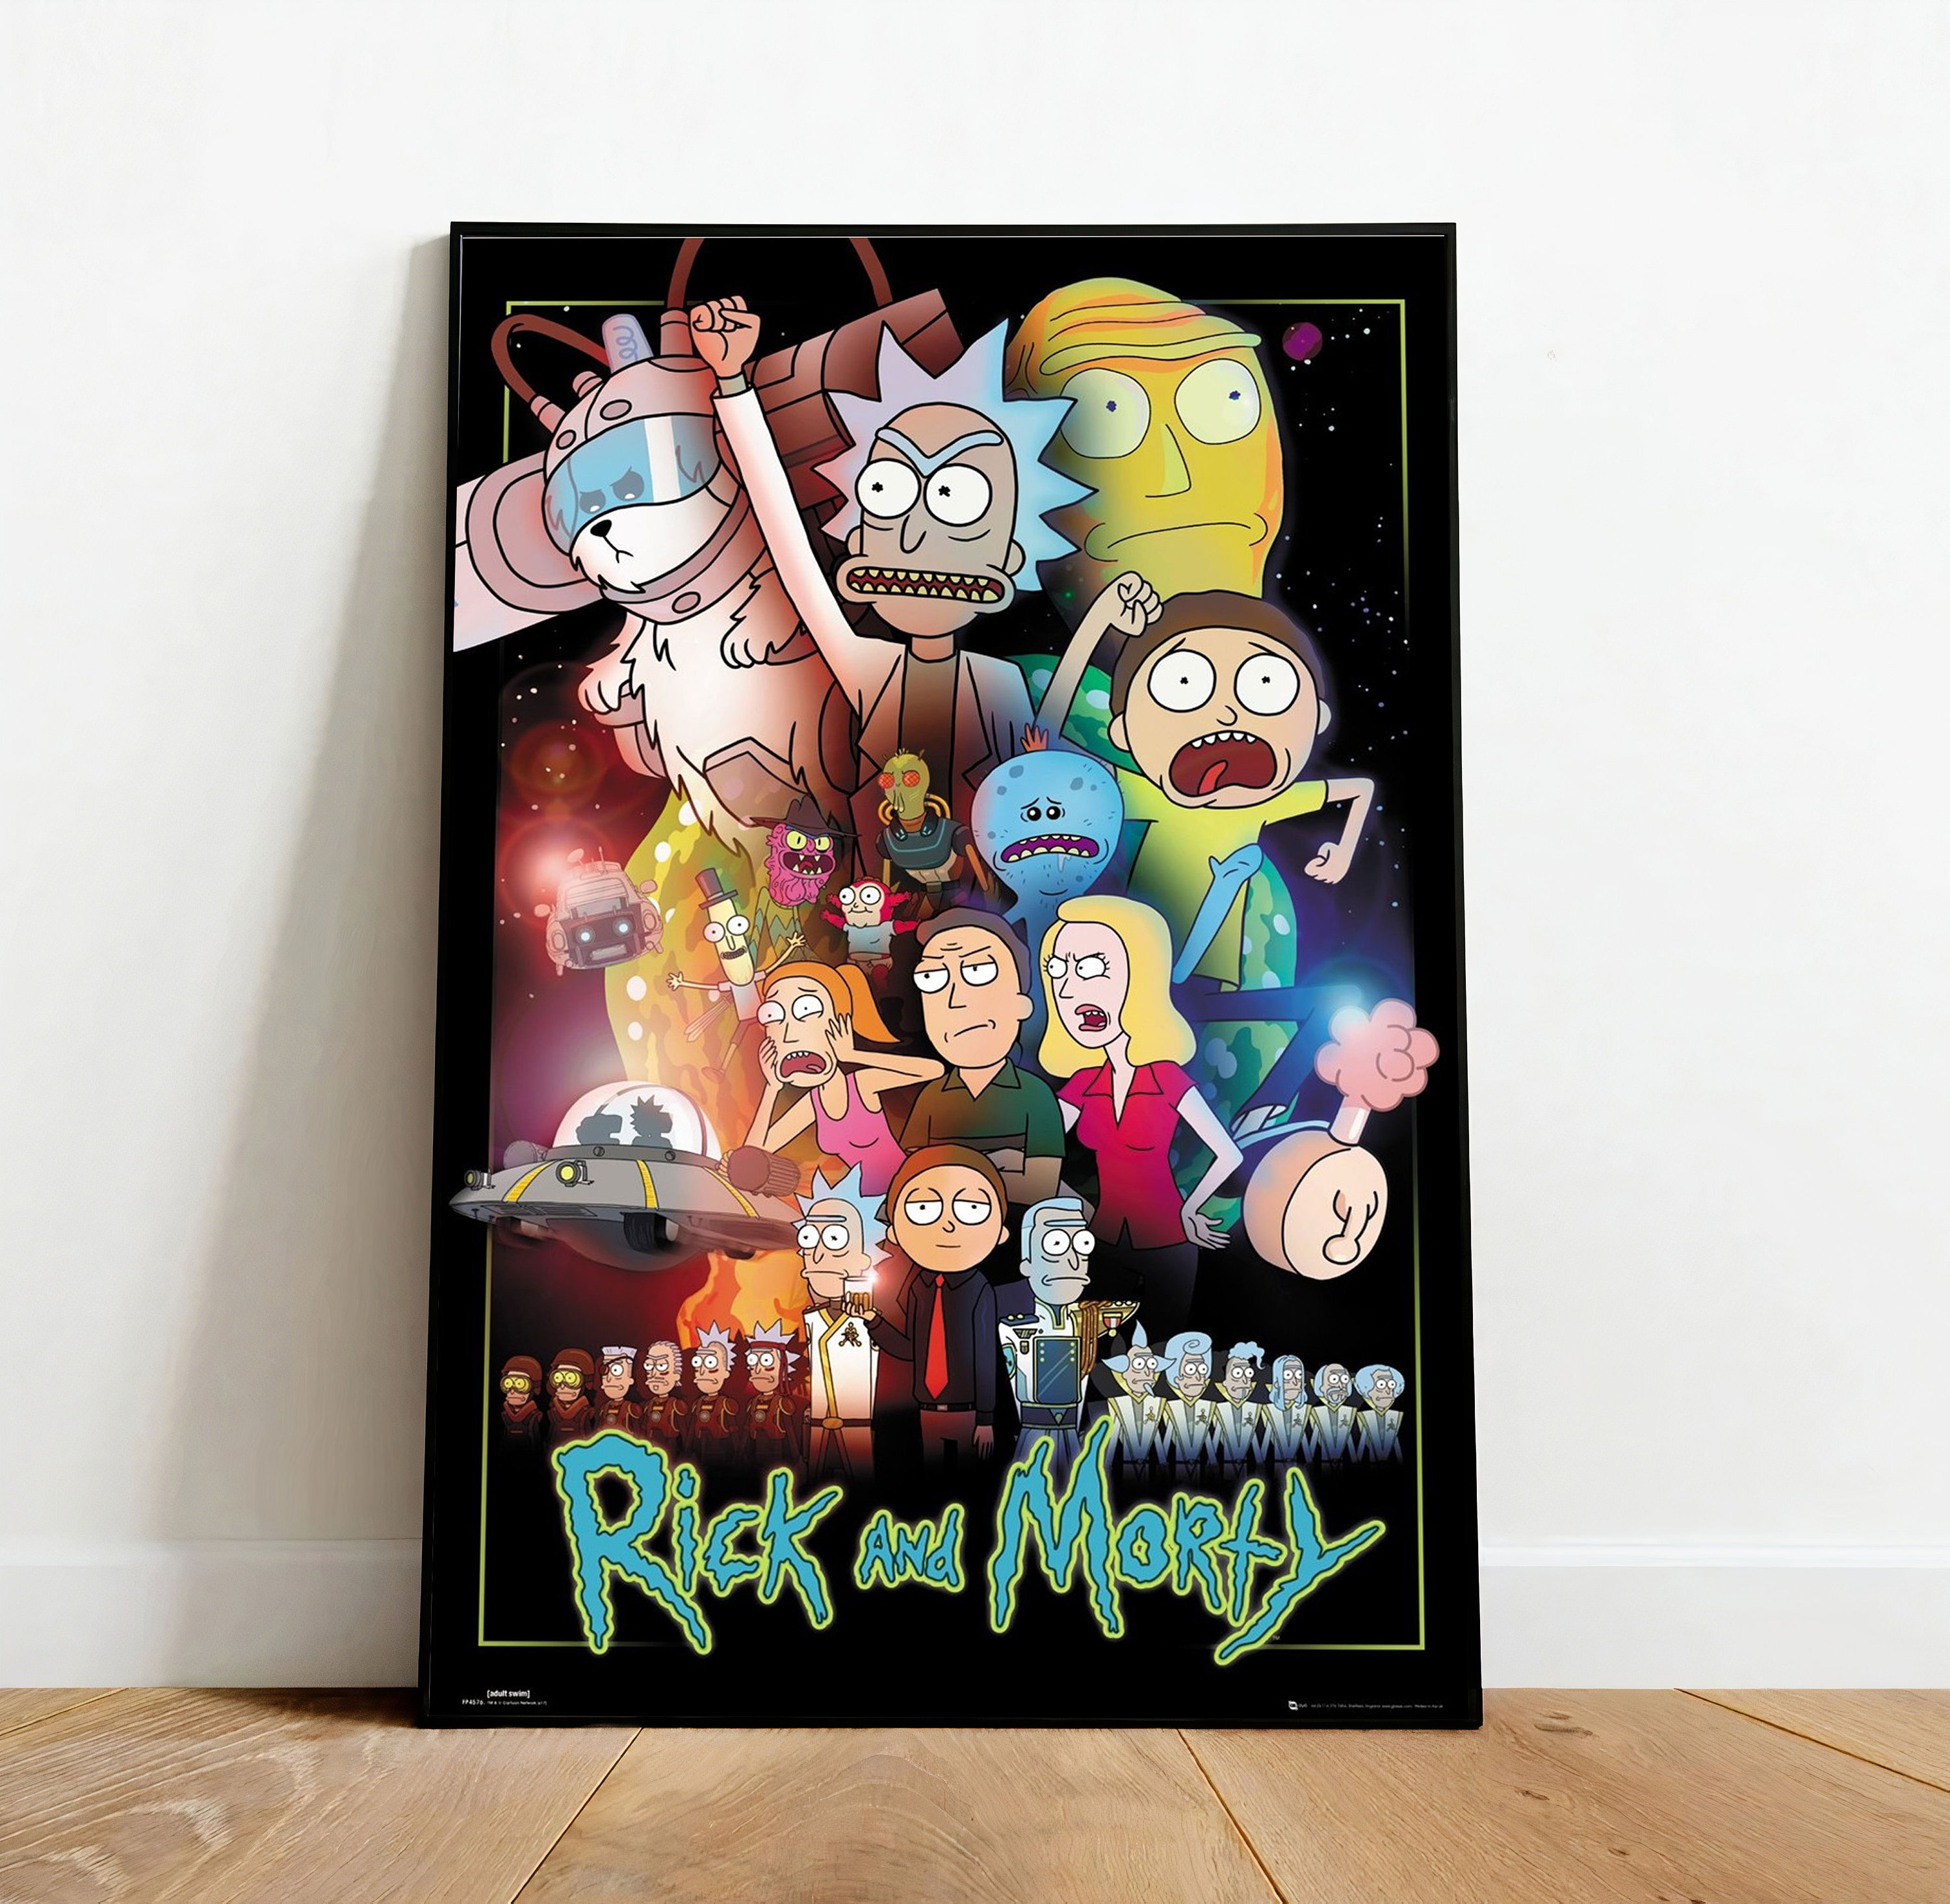 Gaming Bits: Rick and Morty: The Ricks Must Be Crazy Multiverse Game Review, Gaming Bits: Board and Card Game Reviews